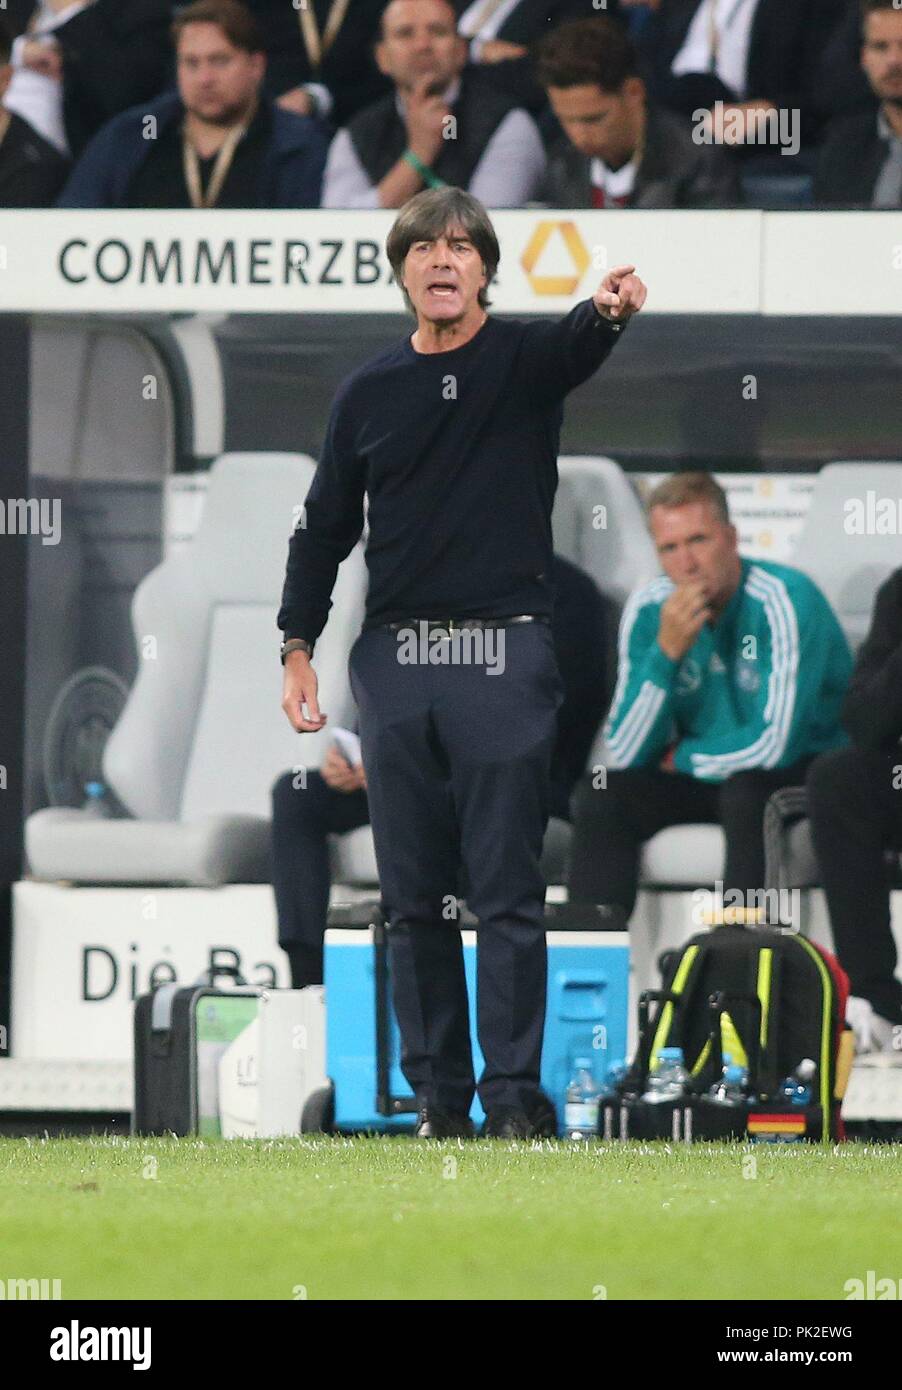 firo: 09.09.2018 Football, Soccer, National Team, Germany, Friendly Match, GER, Germany - Peru, 2: 1, Joachim Low, LOEW, coach, DFB, Germany, full figure, gesture, facial expressions, | usage worldwide Stock Photo